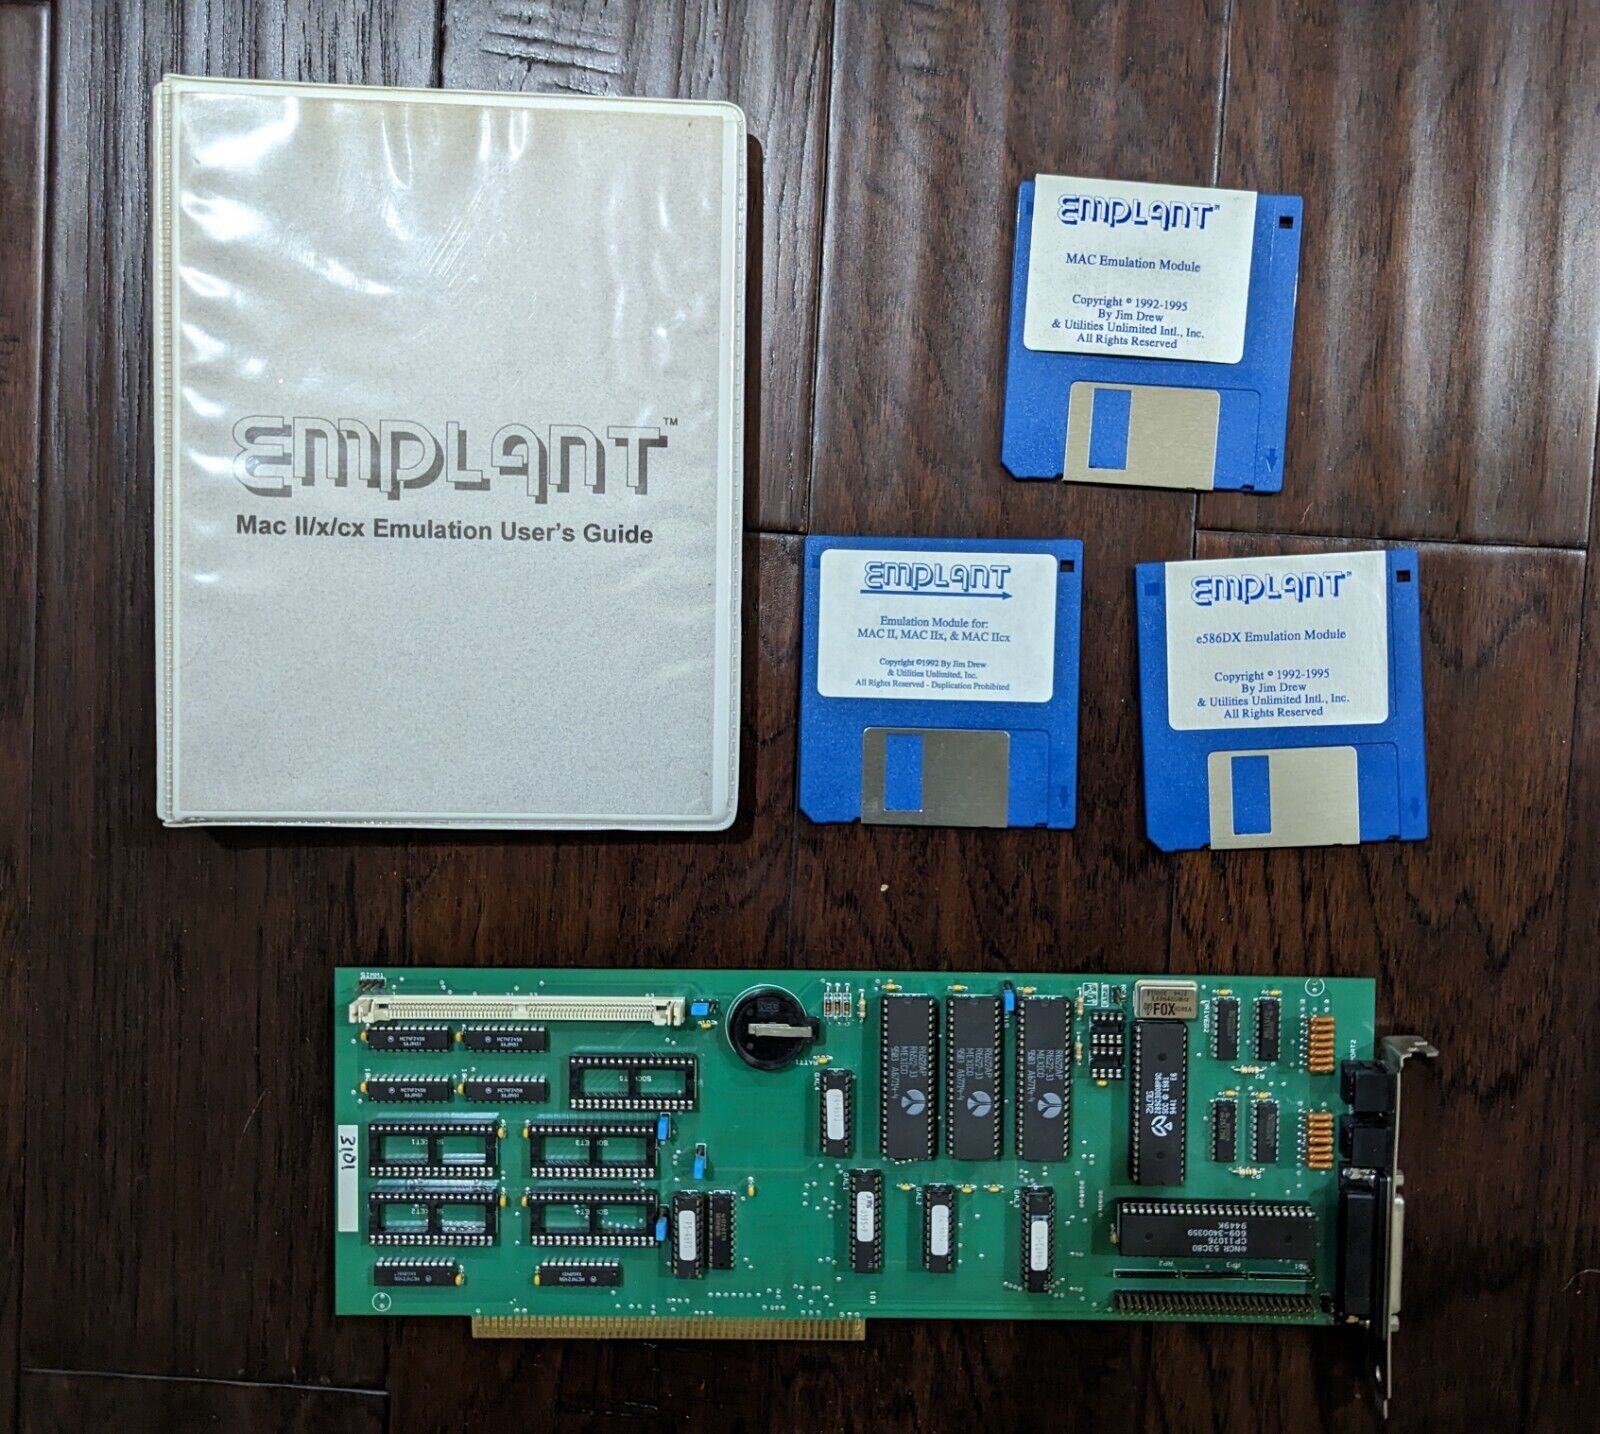 VTG Emplant Deluxe with e586DX IC - Macintosh & PC Emulator Board for the Amiga 